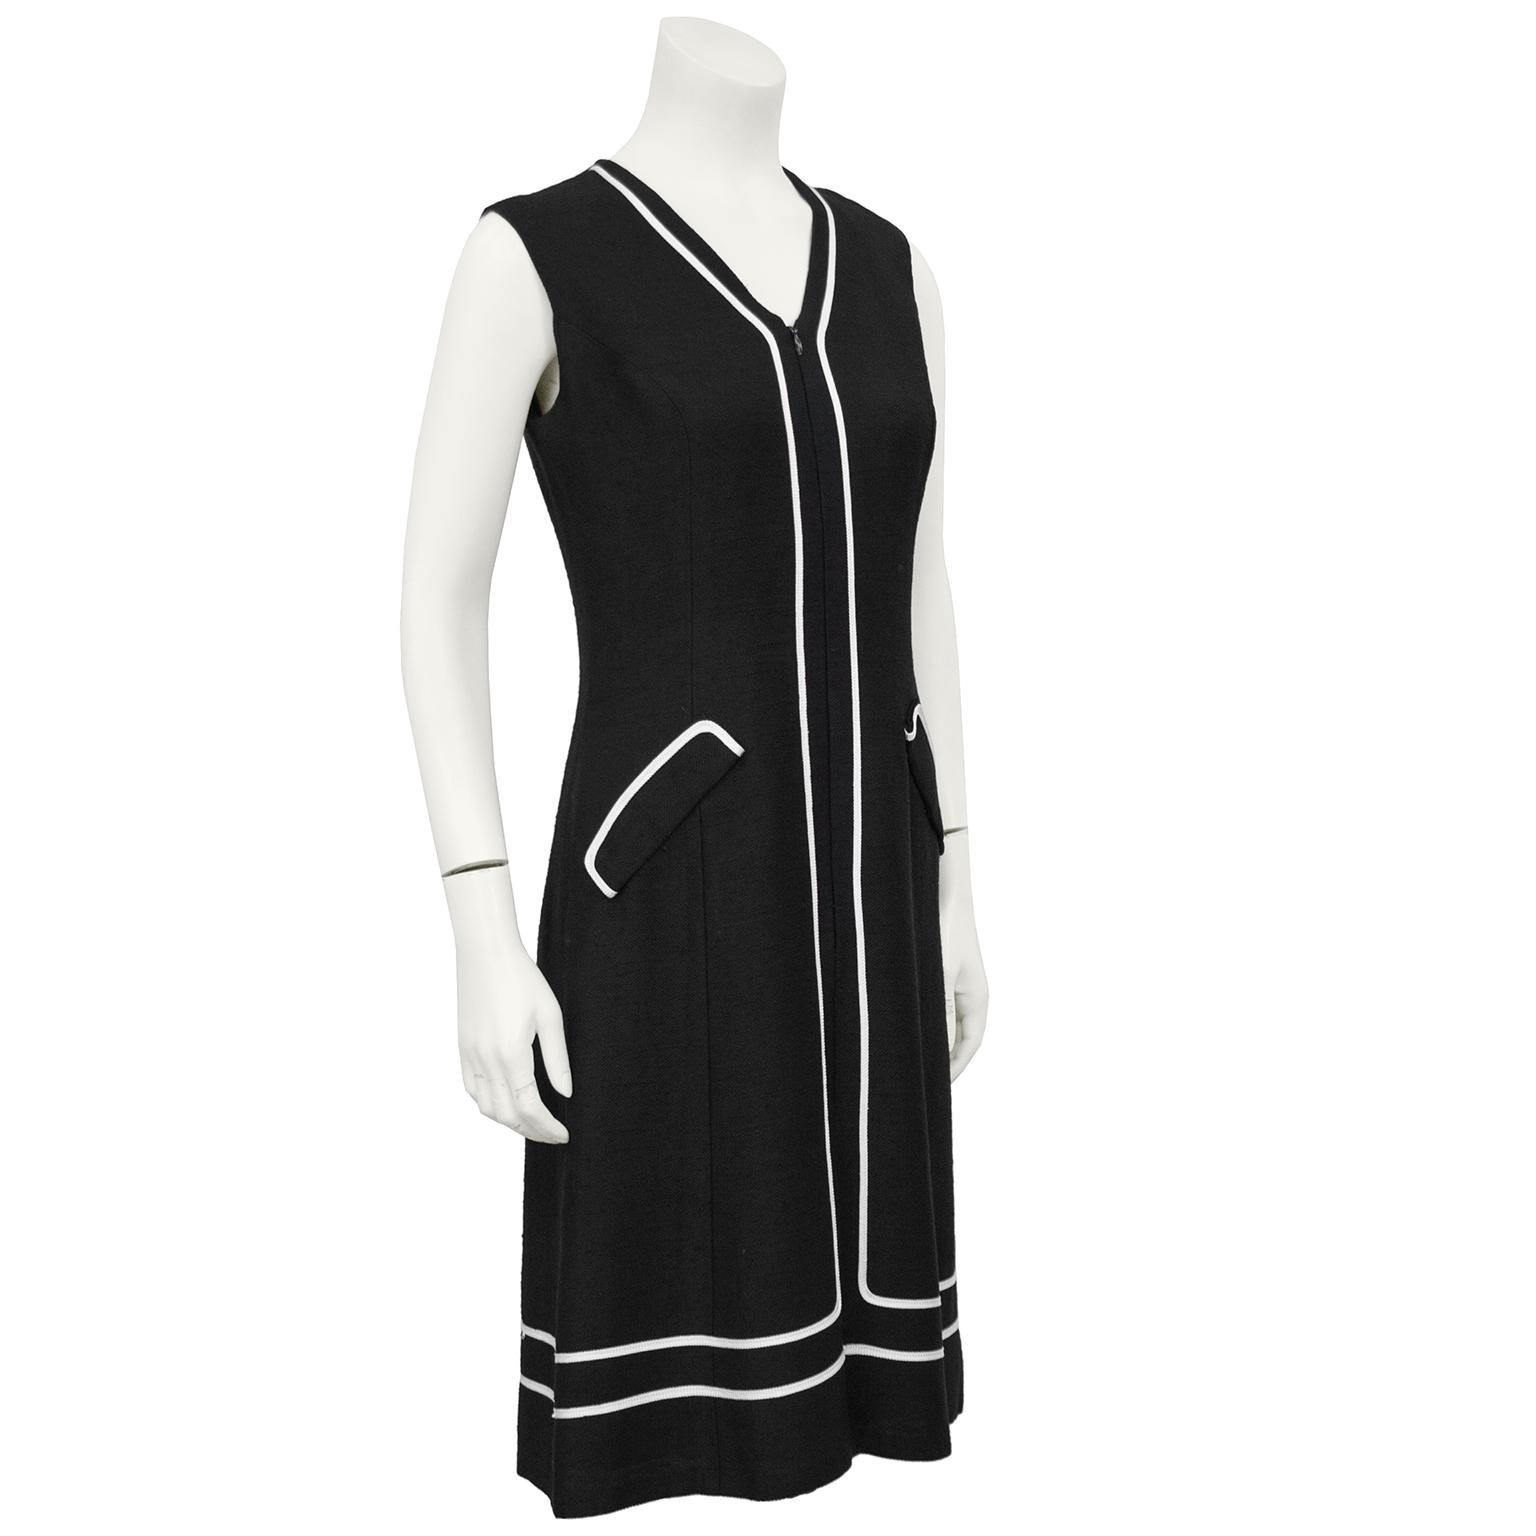 Stylish 1960s anonymous black day dress with white piping along the neckline, hemline and down the front. The dress has two faux pockets on the hips and zips up the front. Uber chic, the perfect LBDD - Little Black Day Dress. Fits a US 4. 